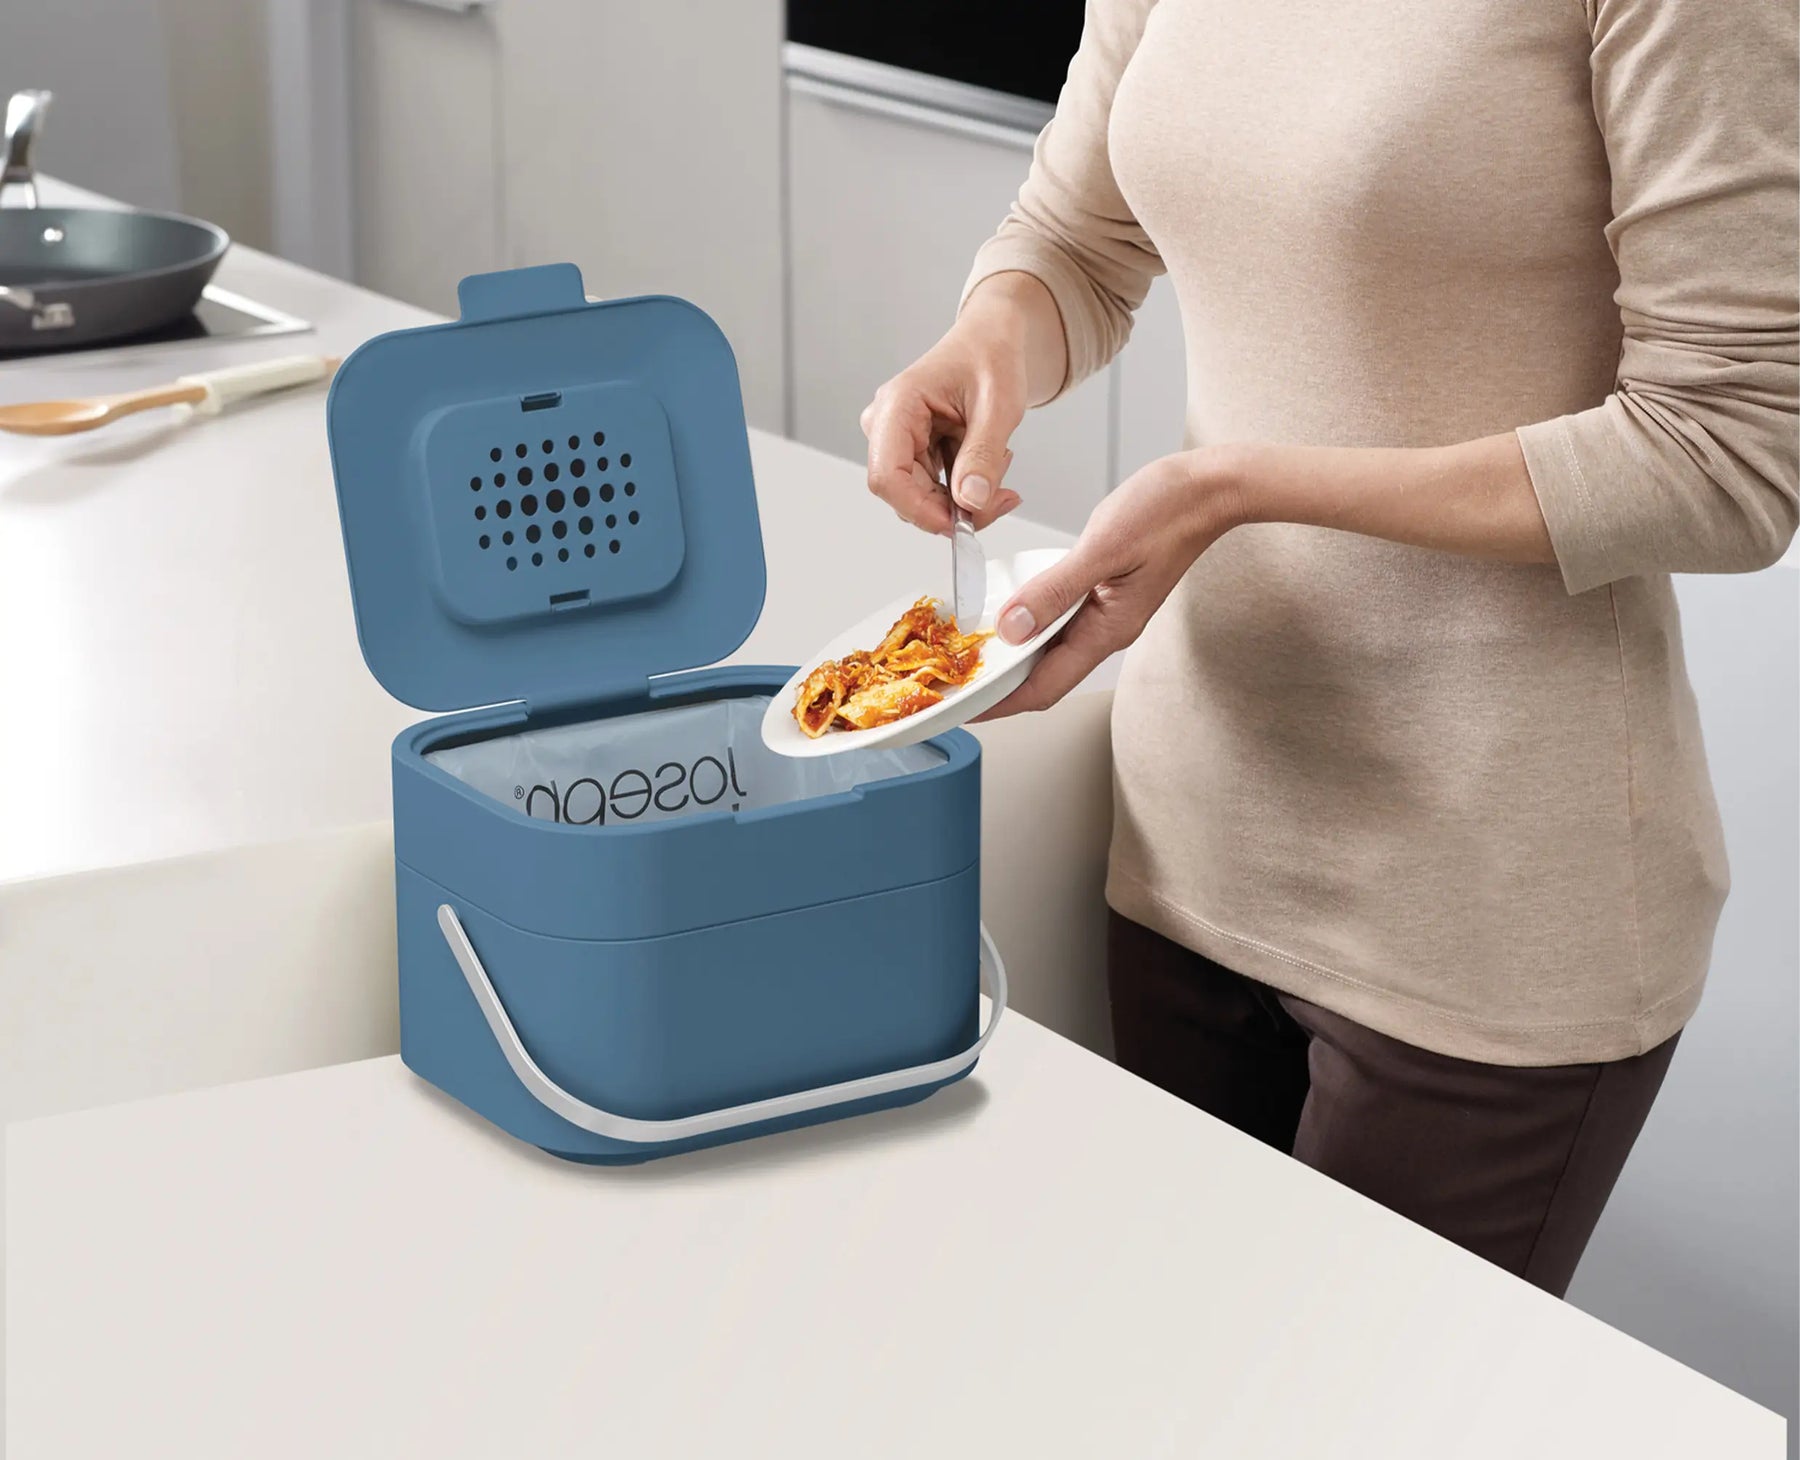 Stack 4L Food Waste Caddy - Editions - 30108 - Image 3